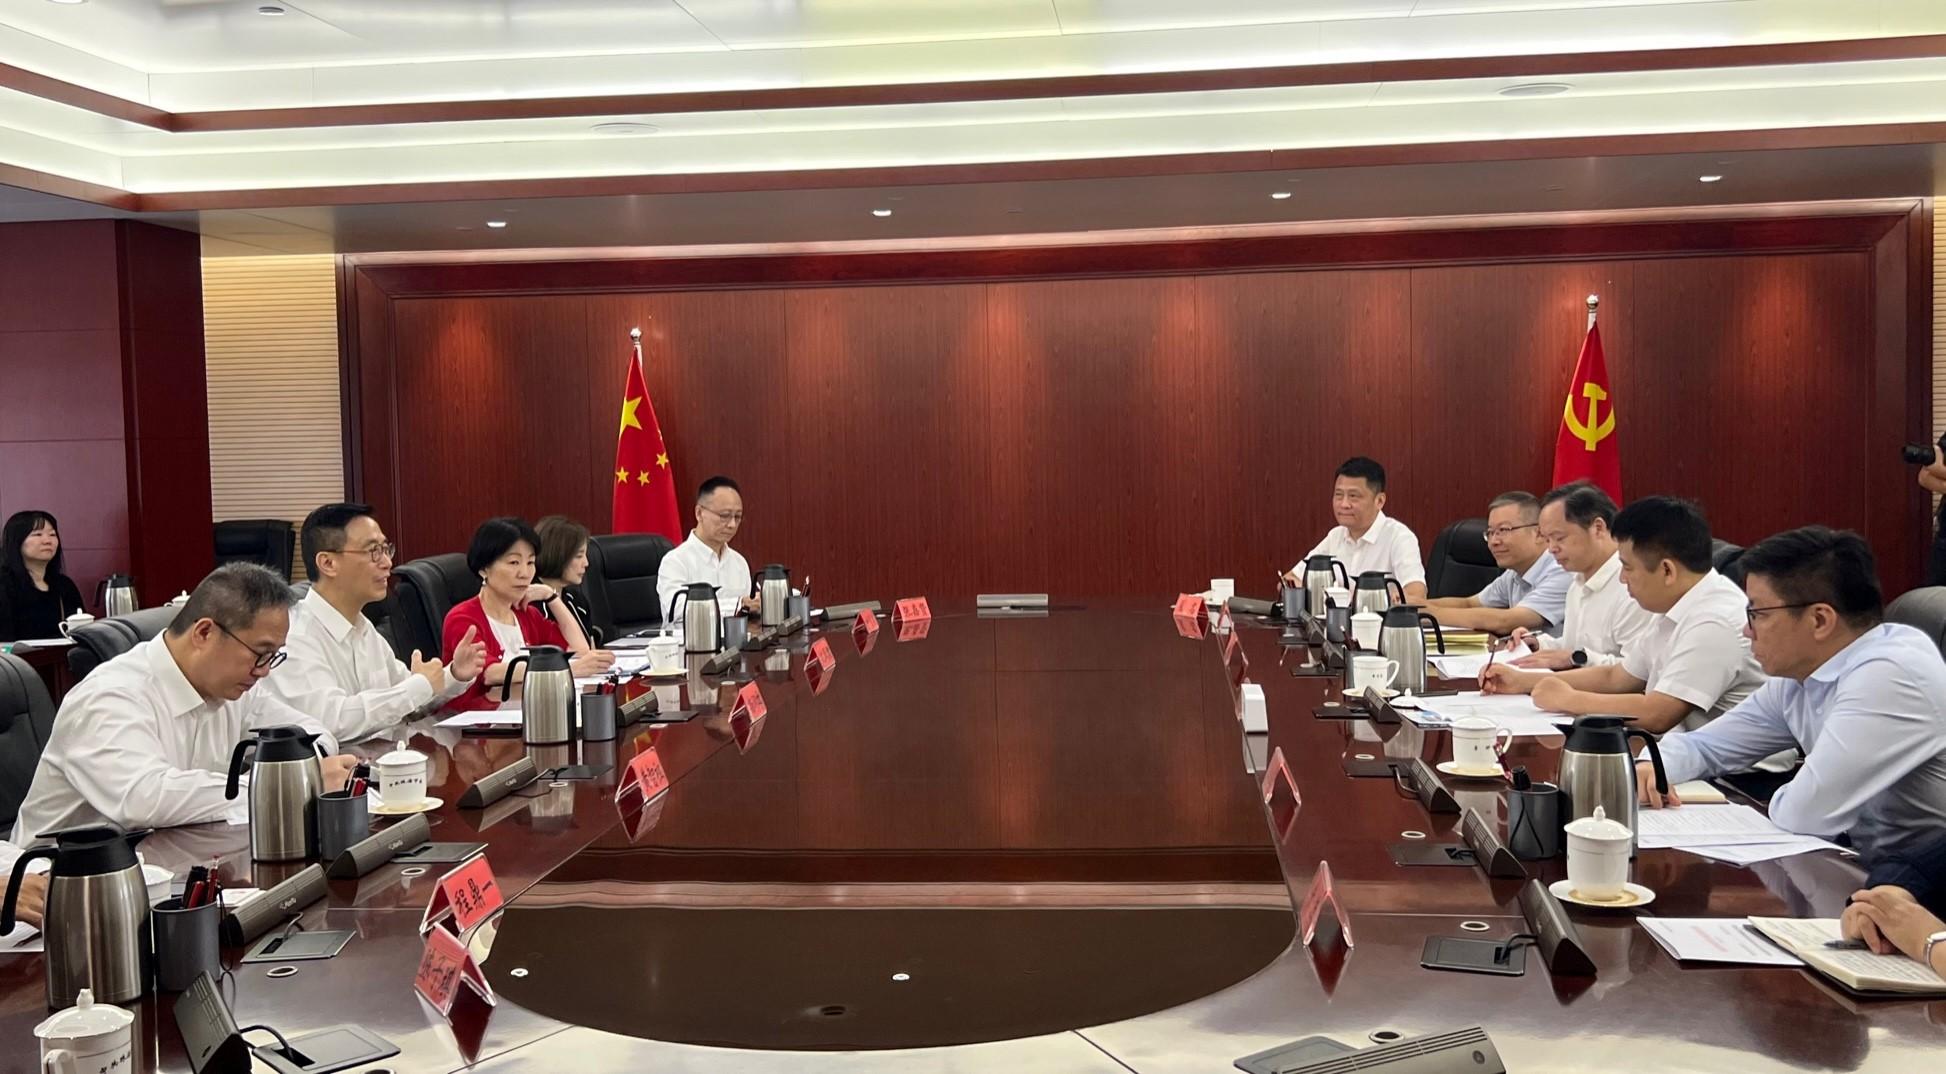 The Secretary for Culture, Sports and Tourism, Mr Kevin Yeung (second left), today (August 17) meets with the Mayor of the Zhuhai Municipal People's Government, Mr Huang Zhihao (second right), and the Director of the Zhuhai Municipal Bureau of Culture, Radio, Television, Tourism and Sports, Mr Yan Weimin (fourth right), in Zhuhai to exchange views and explore opportunities to strengthen collaboration. The Permanent Secretary for Culture, Sports and Tourism, Mr Joe Wong (first left), and the Commissioner for Tourism, Ms Vivian Sum (third left), also attend.